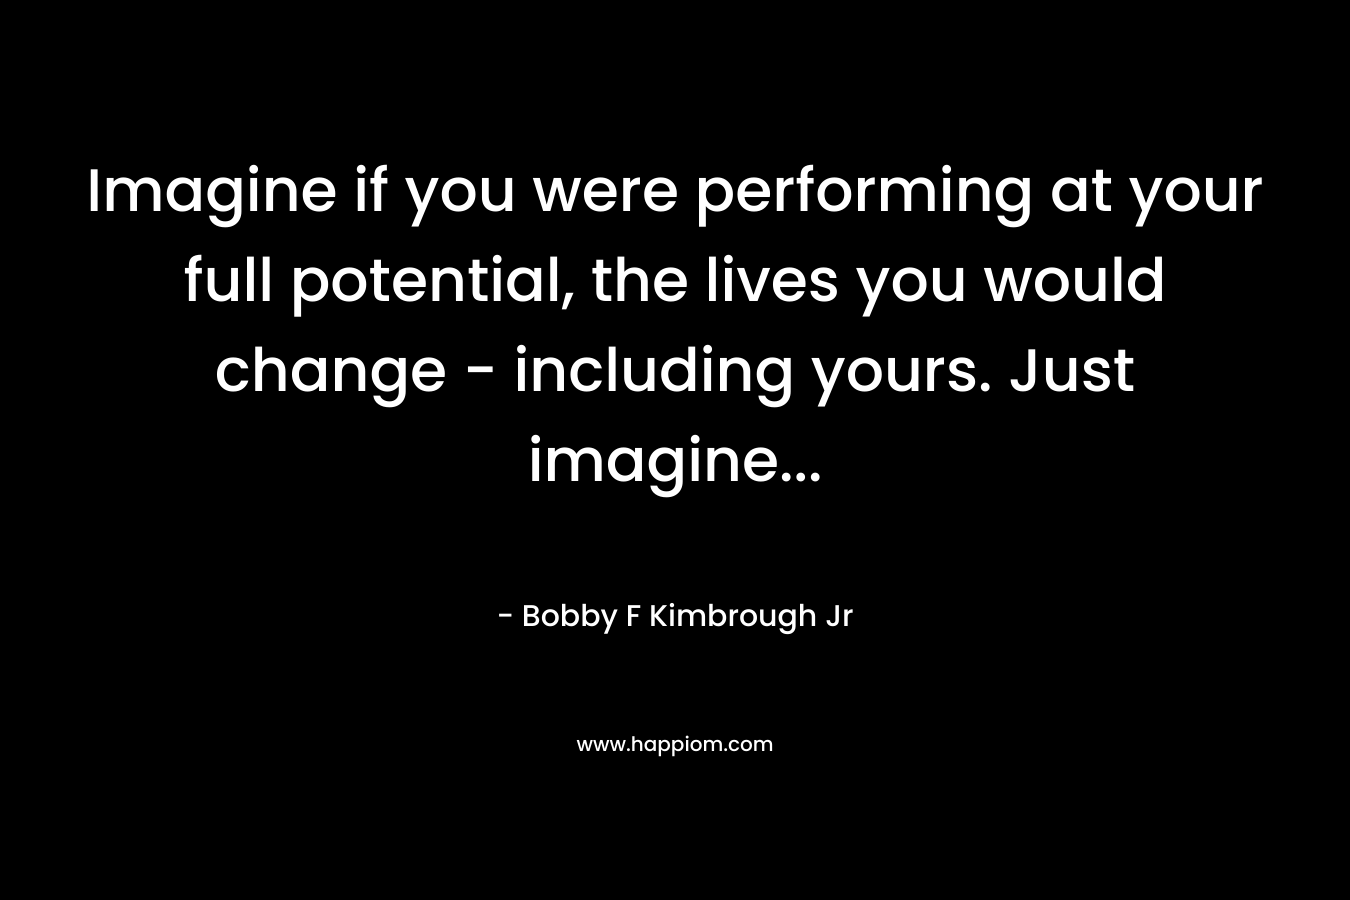 Imagine if you were performing at your full potential, the lives you would change - including yours. Just imagine...